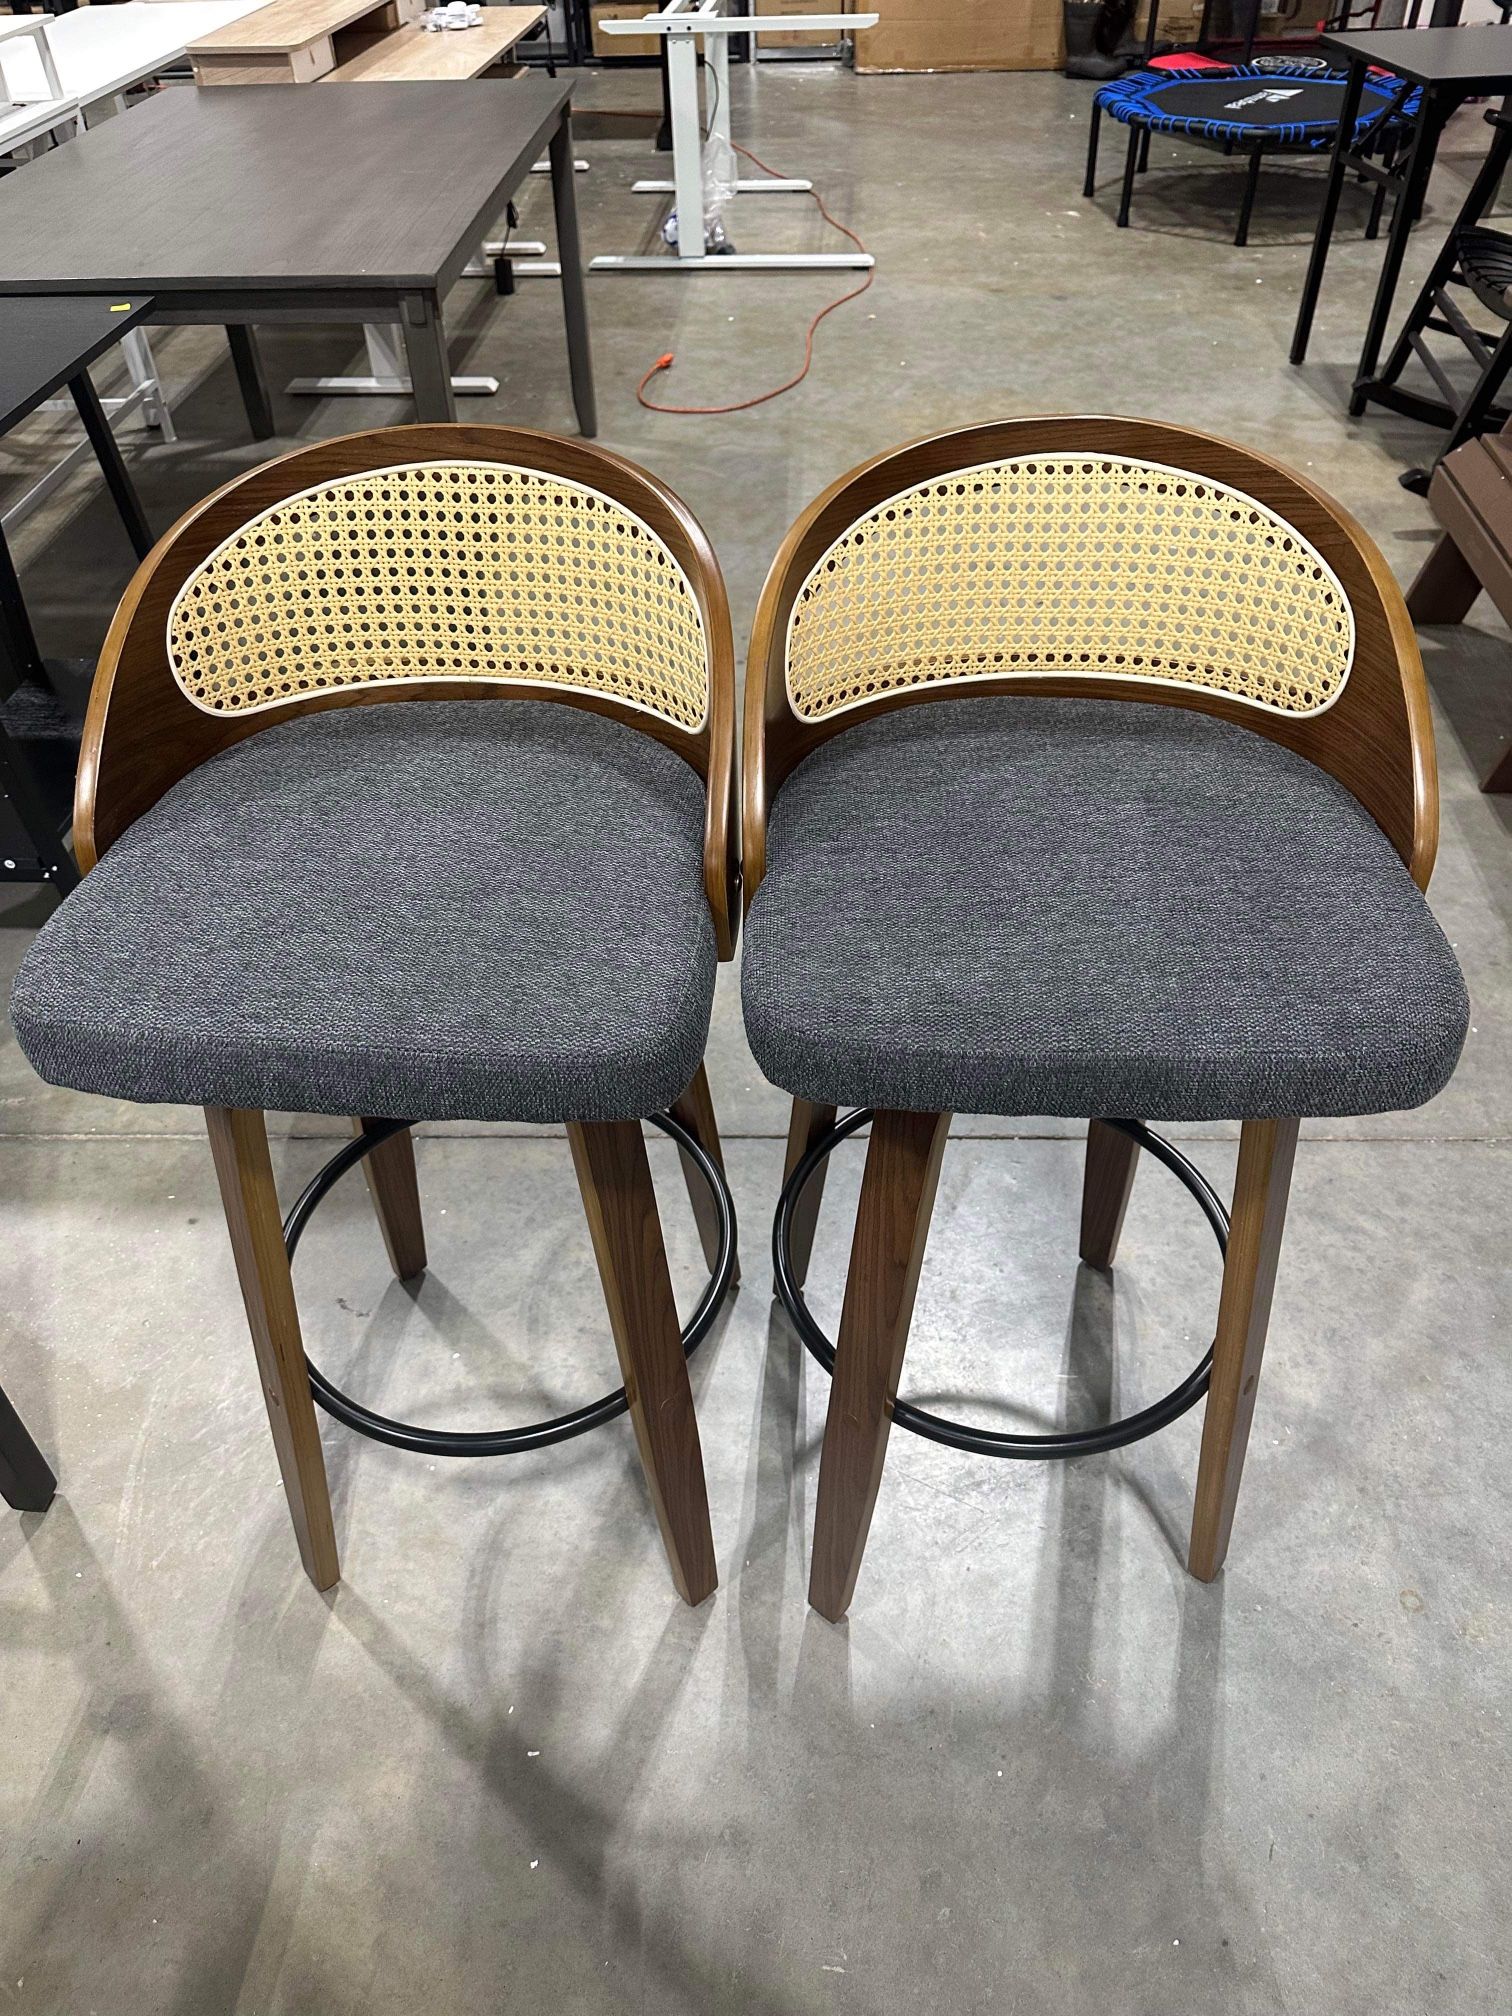 30" Swivel Rattan Bar Stools Set of 2,Mid-Century Modern Gray Linen Fabric Upholstered Counter Height Stools,Kitchen Island Barstools with Rattan Low 